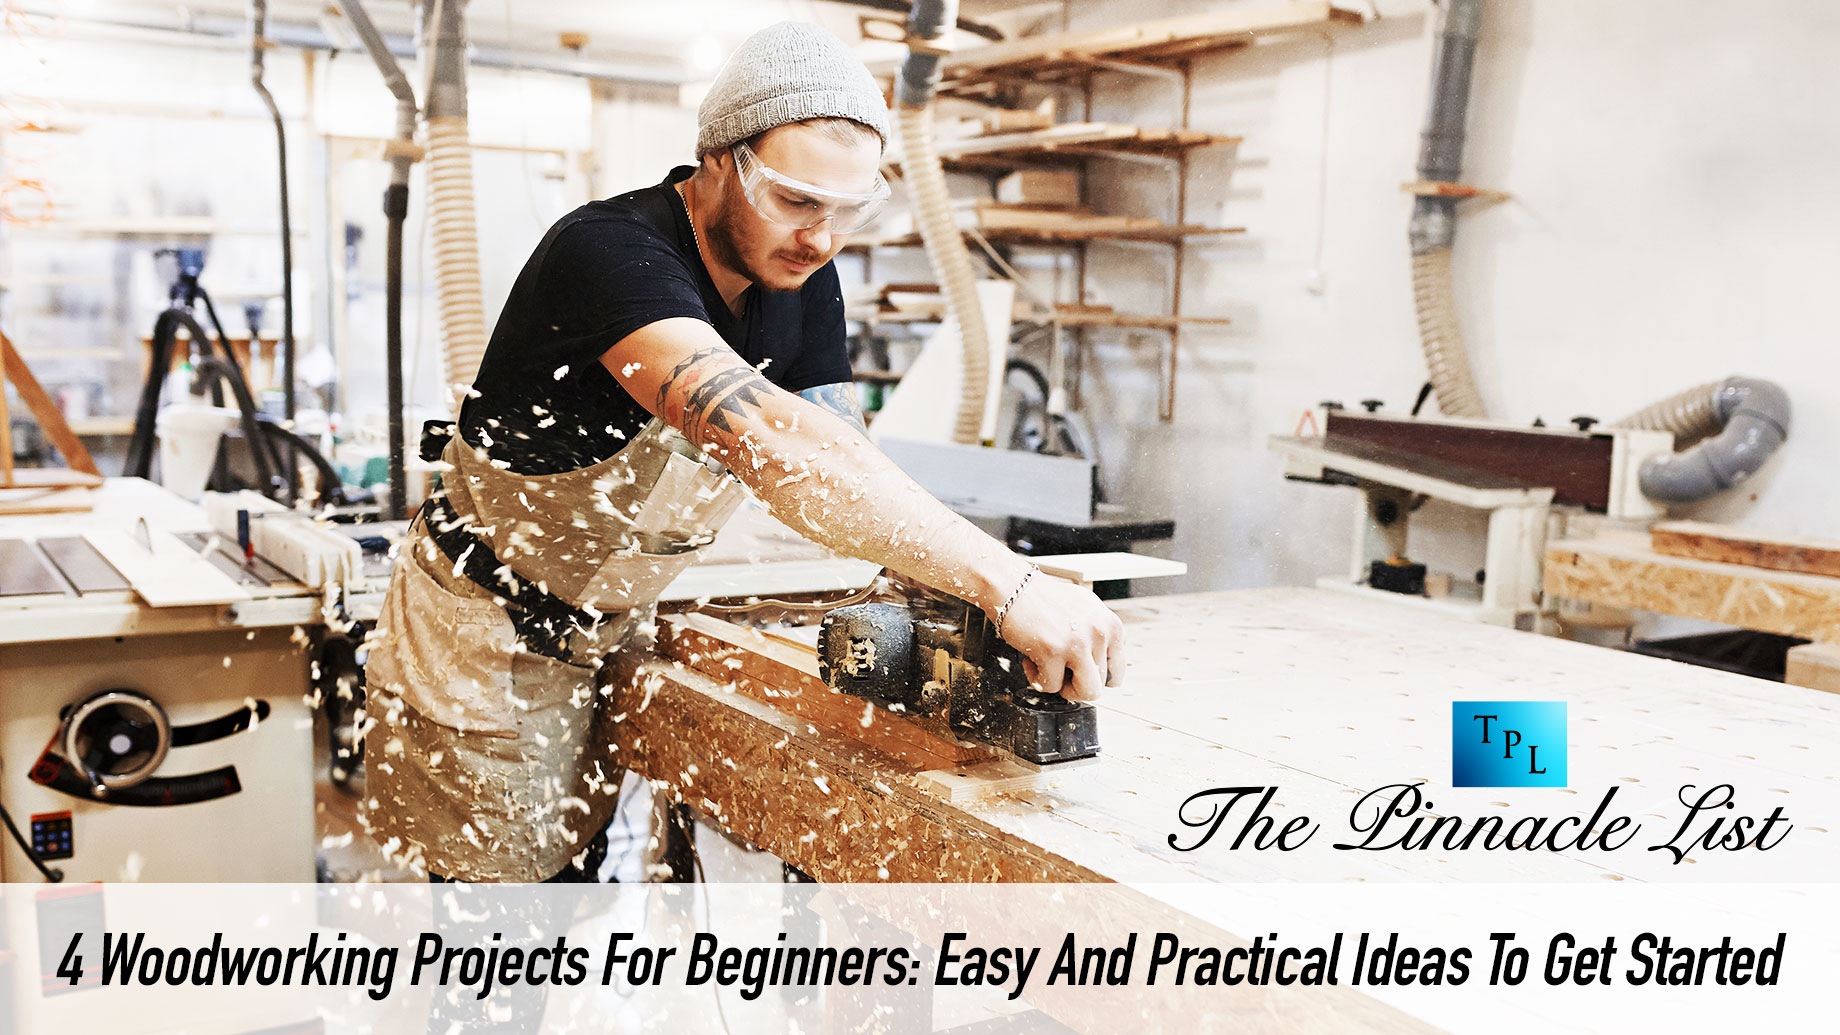 4 Woodworking Projects For Beginners: Easy And Practical Ideas To Get Started